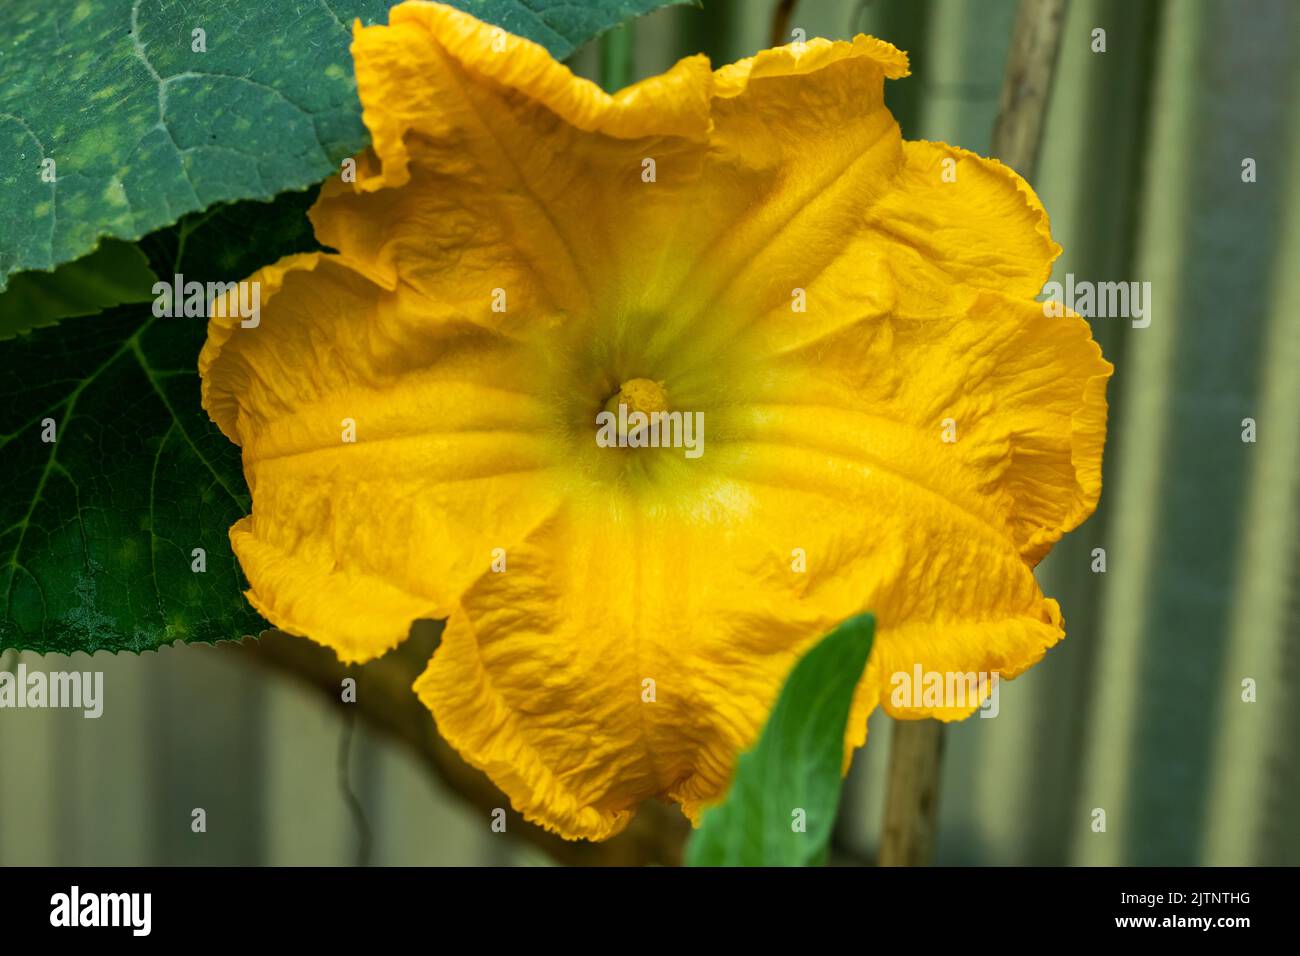 Pumpkin flowers are only open for about six hours beginning at the sun up. The pumpkin flower is a type of vibrant edible flower produced by pumpkin p Stock Photo